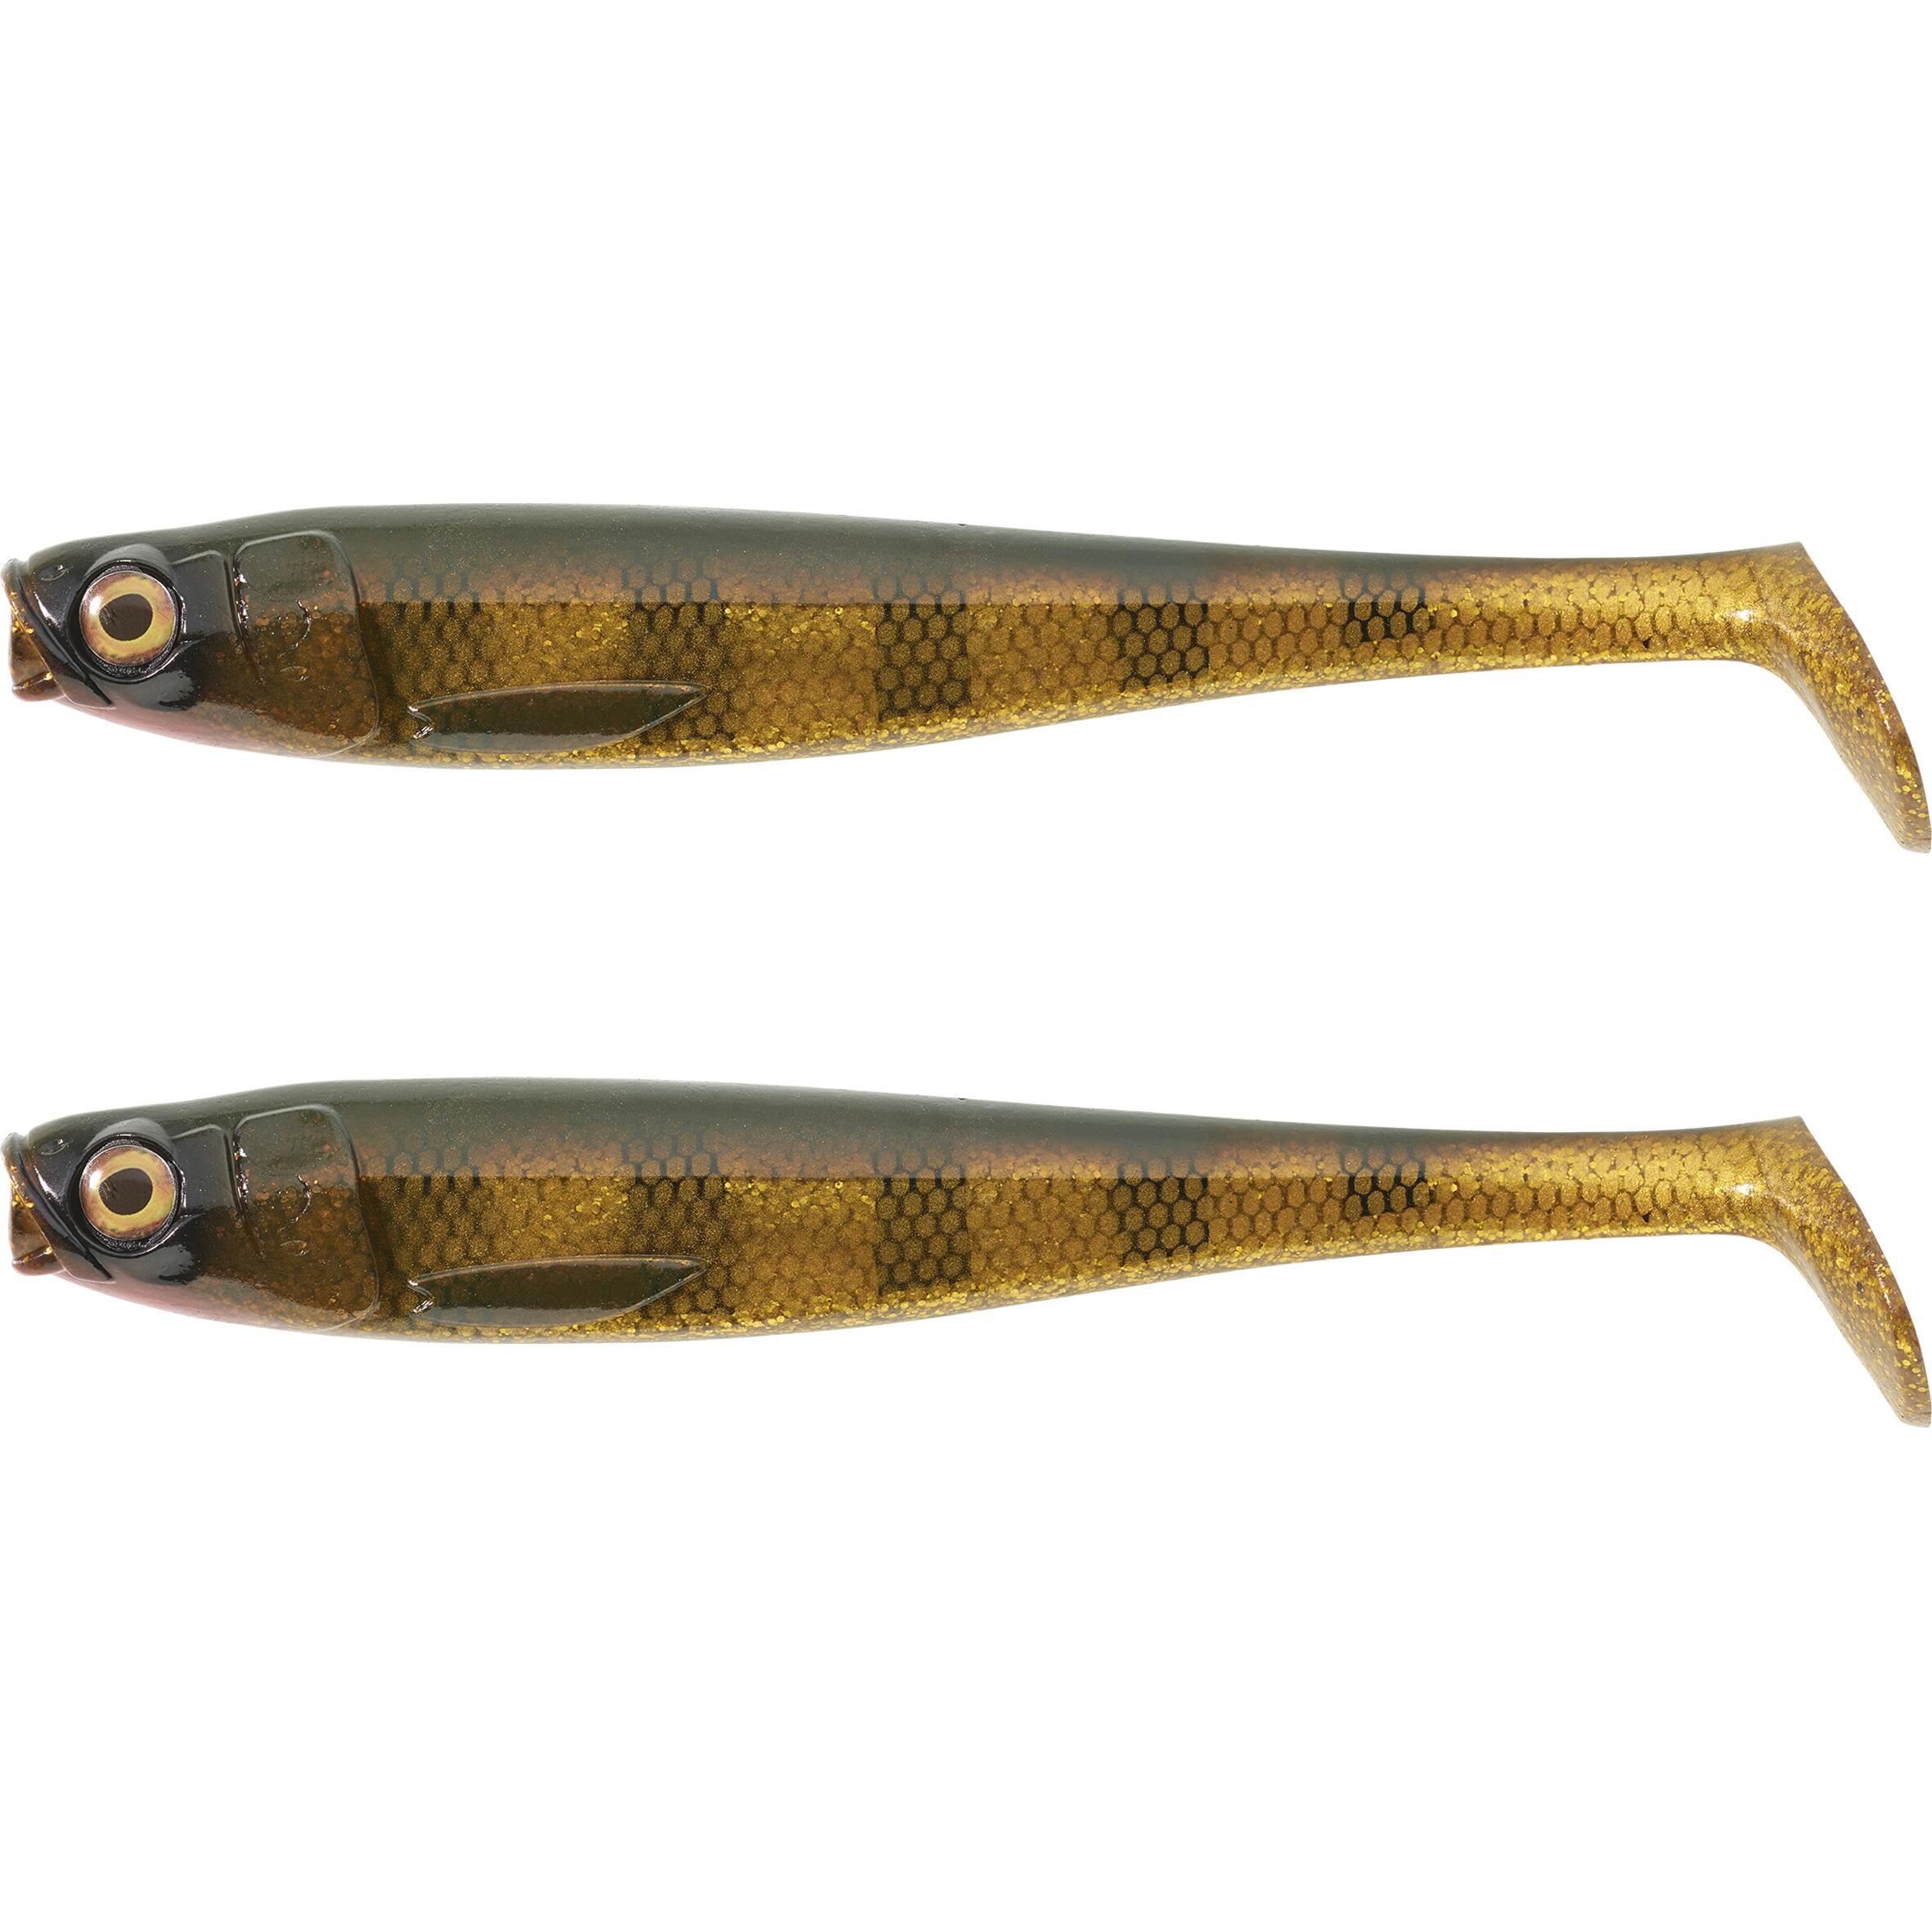 CAPERLAN ROGEN SOFT SHAD PIKE LURE 120 GOLD X2